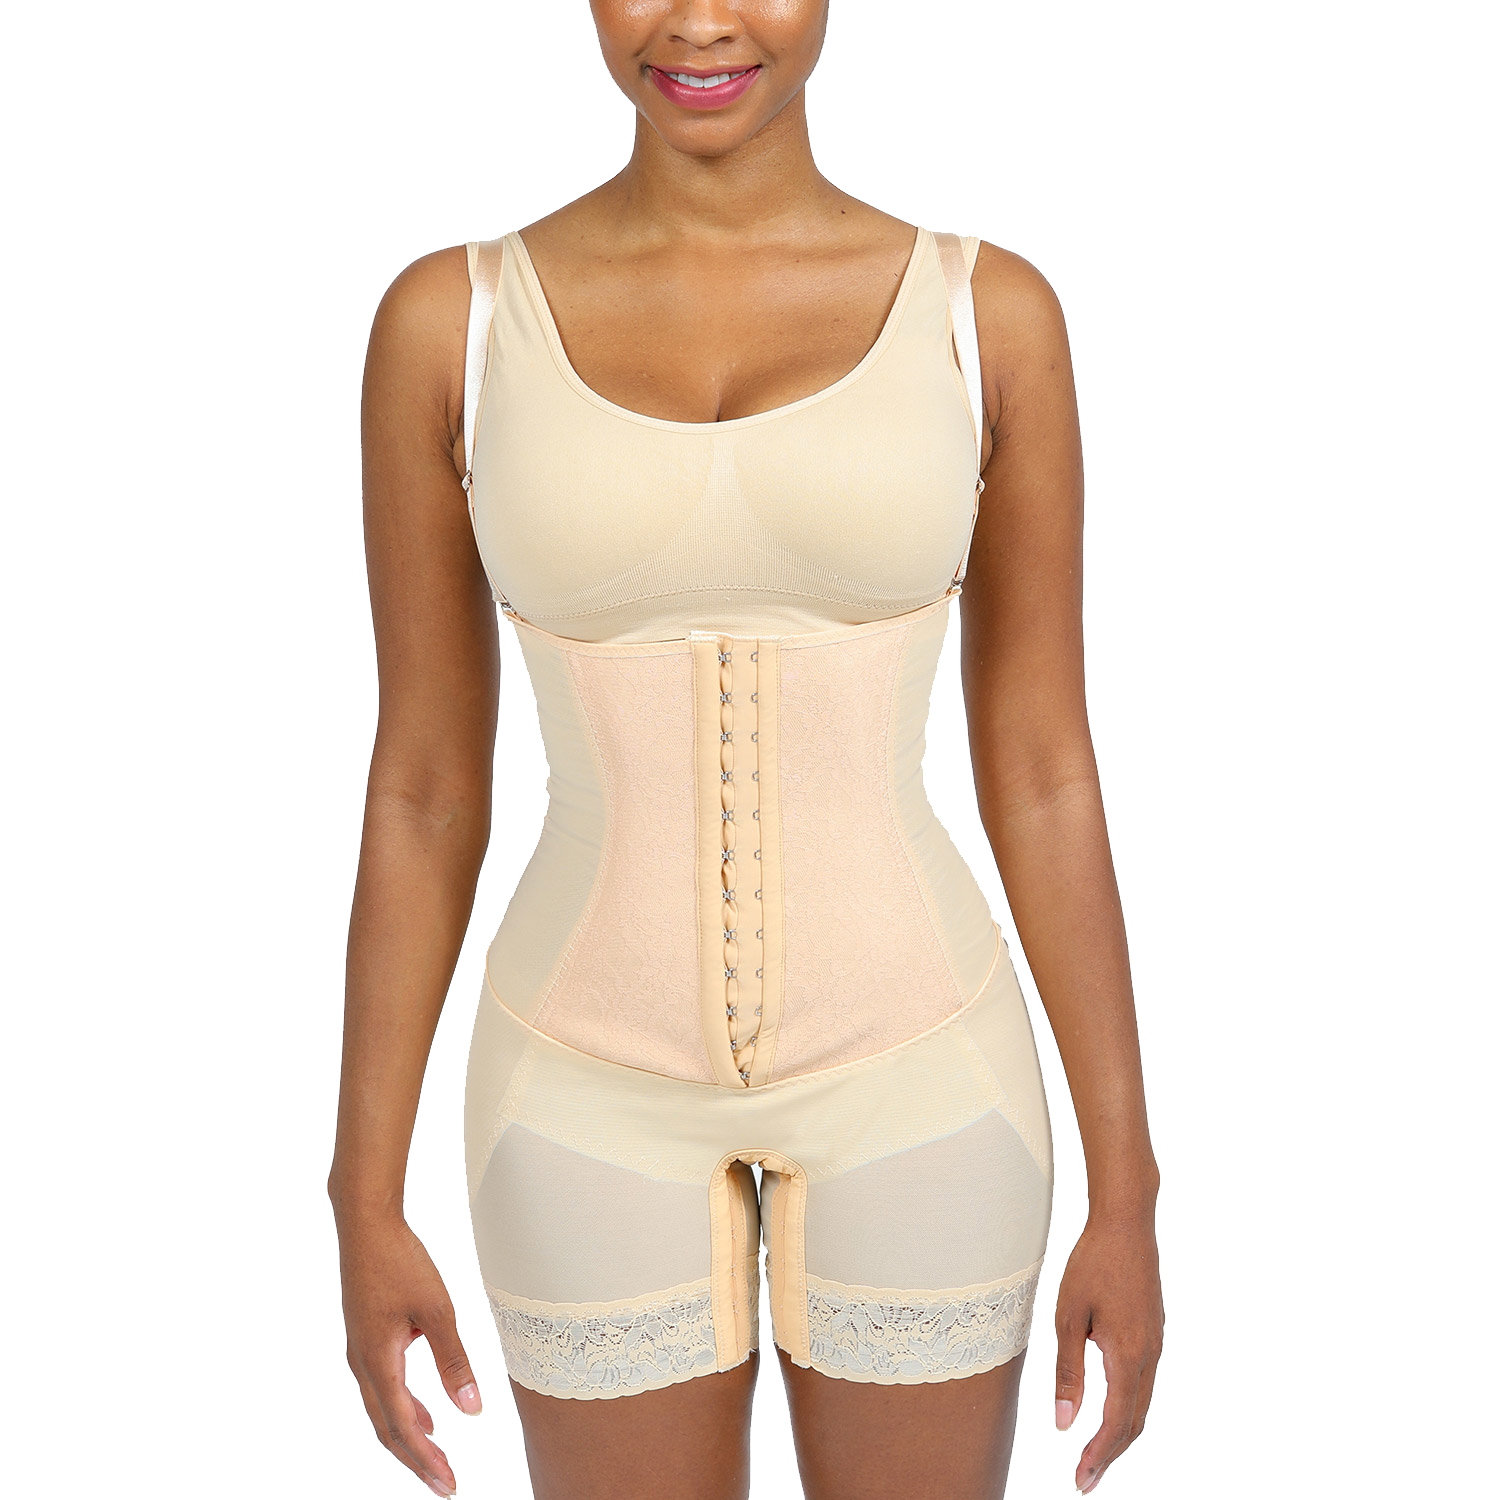 Ardyss Body Magic - ARDYSS PANTY RESHAPER; Reshape your Buttocks & Hips!  The Panty Reshaper works by helping to re-distribute the buttock muscles,  enhancing the buttocks appearance. This reshaper provides shape, volume